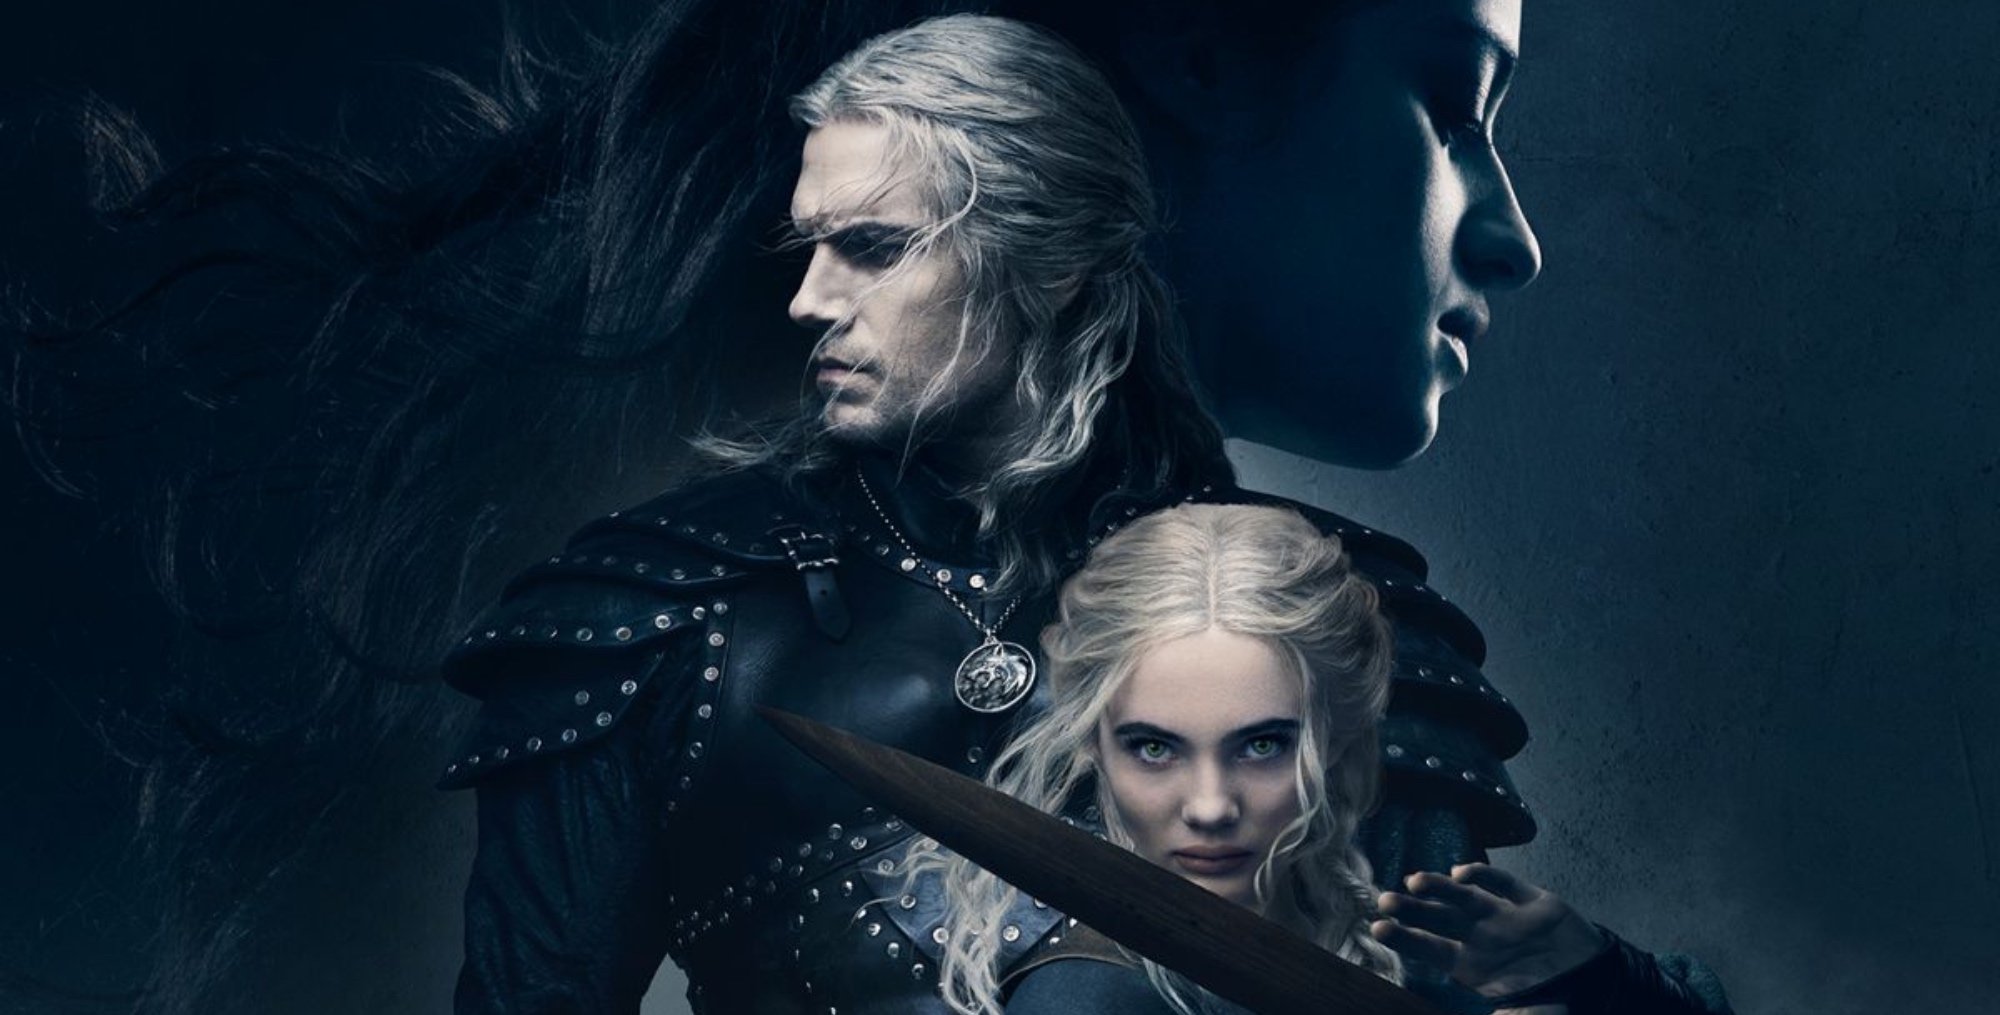 Geralt, Ciri and Yennefer in 'The Witcher' Season 2 poster wearing armor in relation to lack of sex scenes.